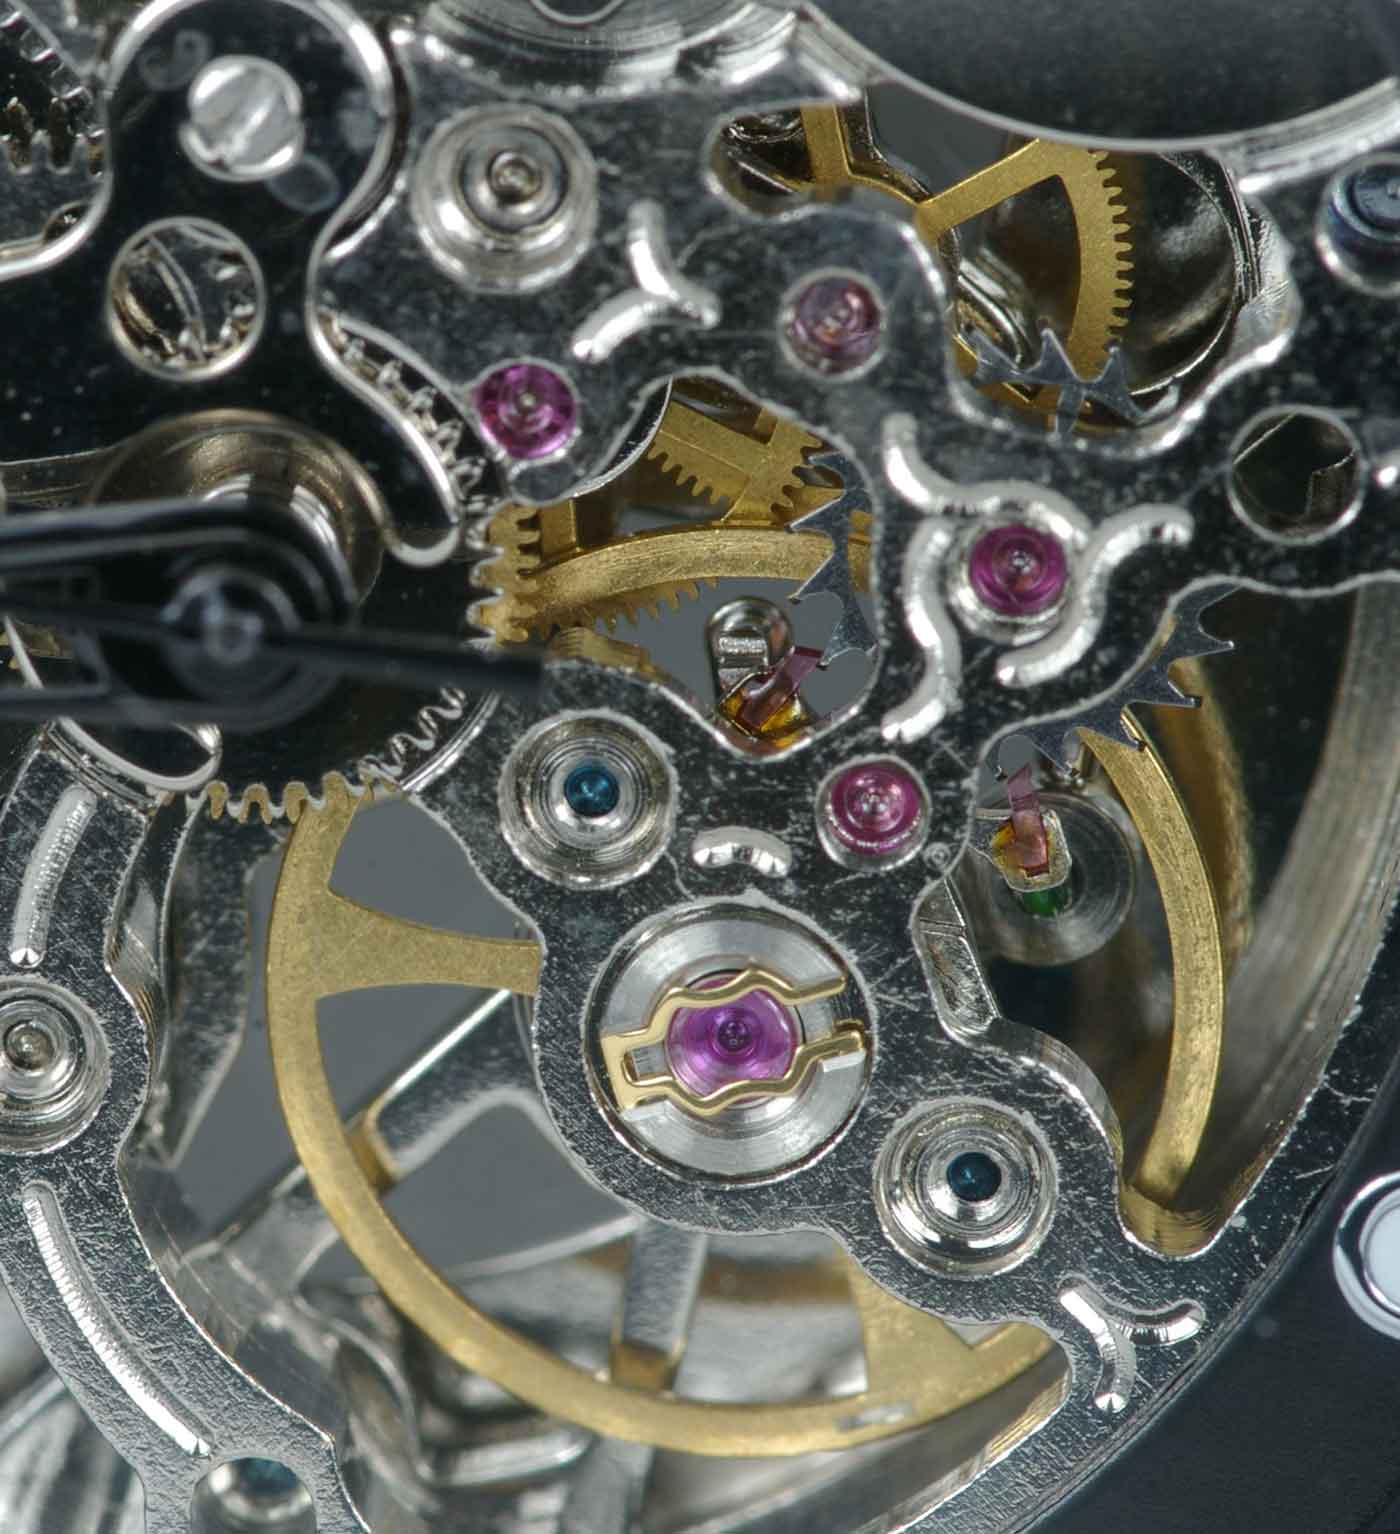 Chinese movement escapement and jewels